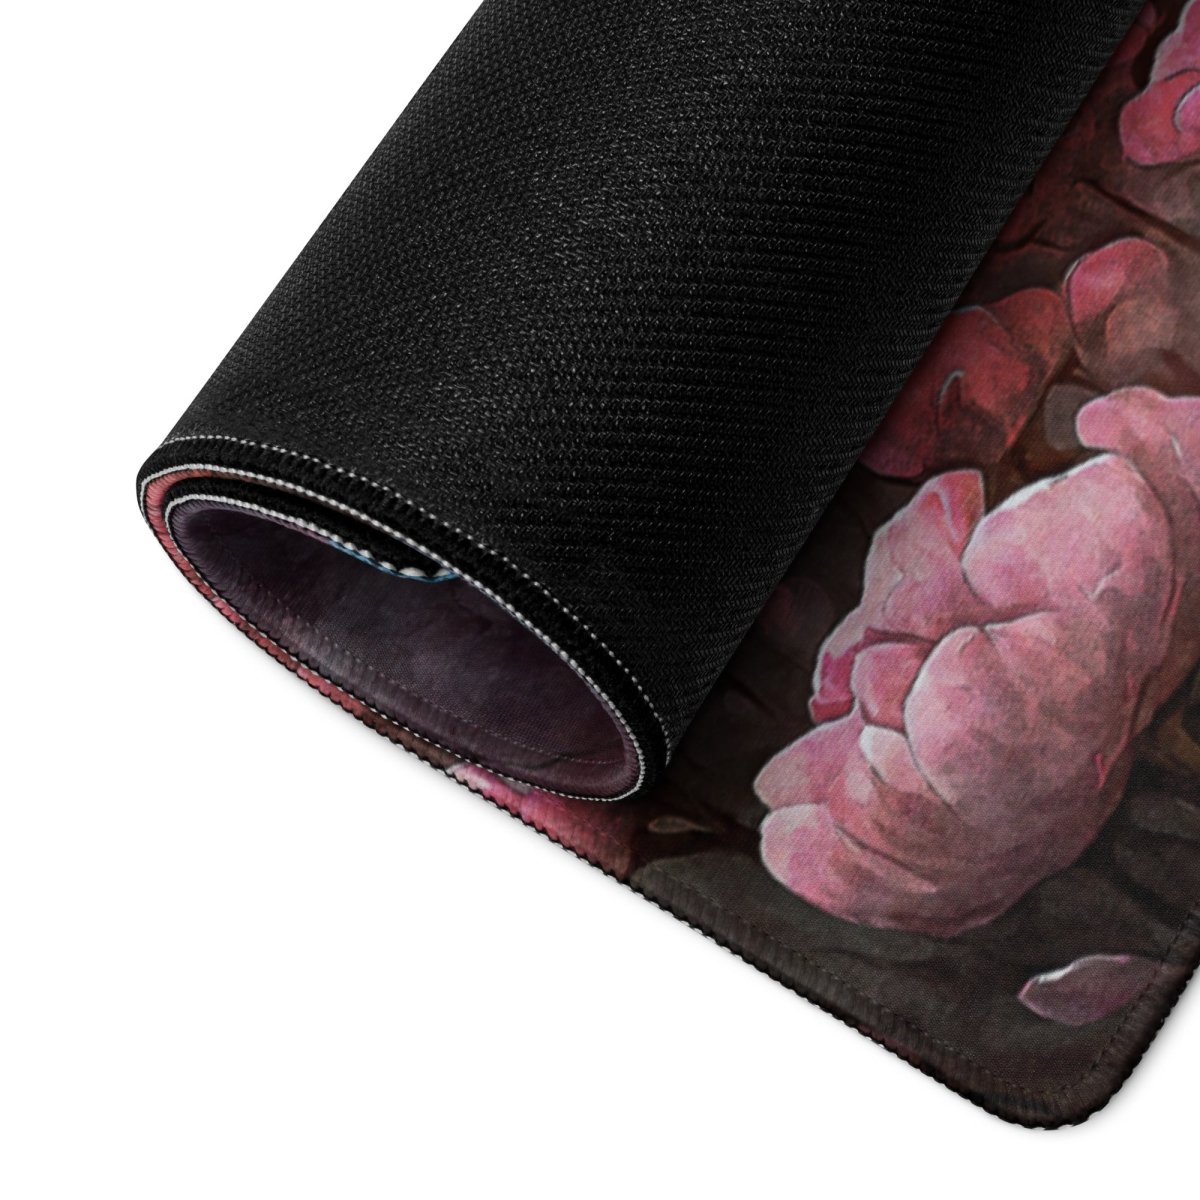 Pink bloom - Gaming mouse pad - Ever colorful